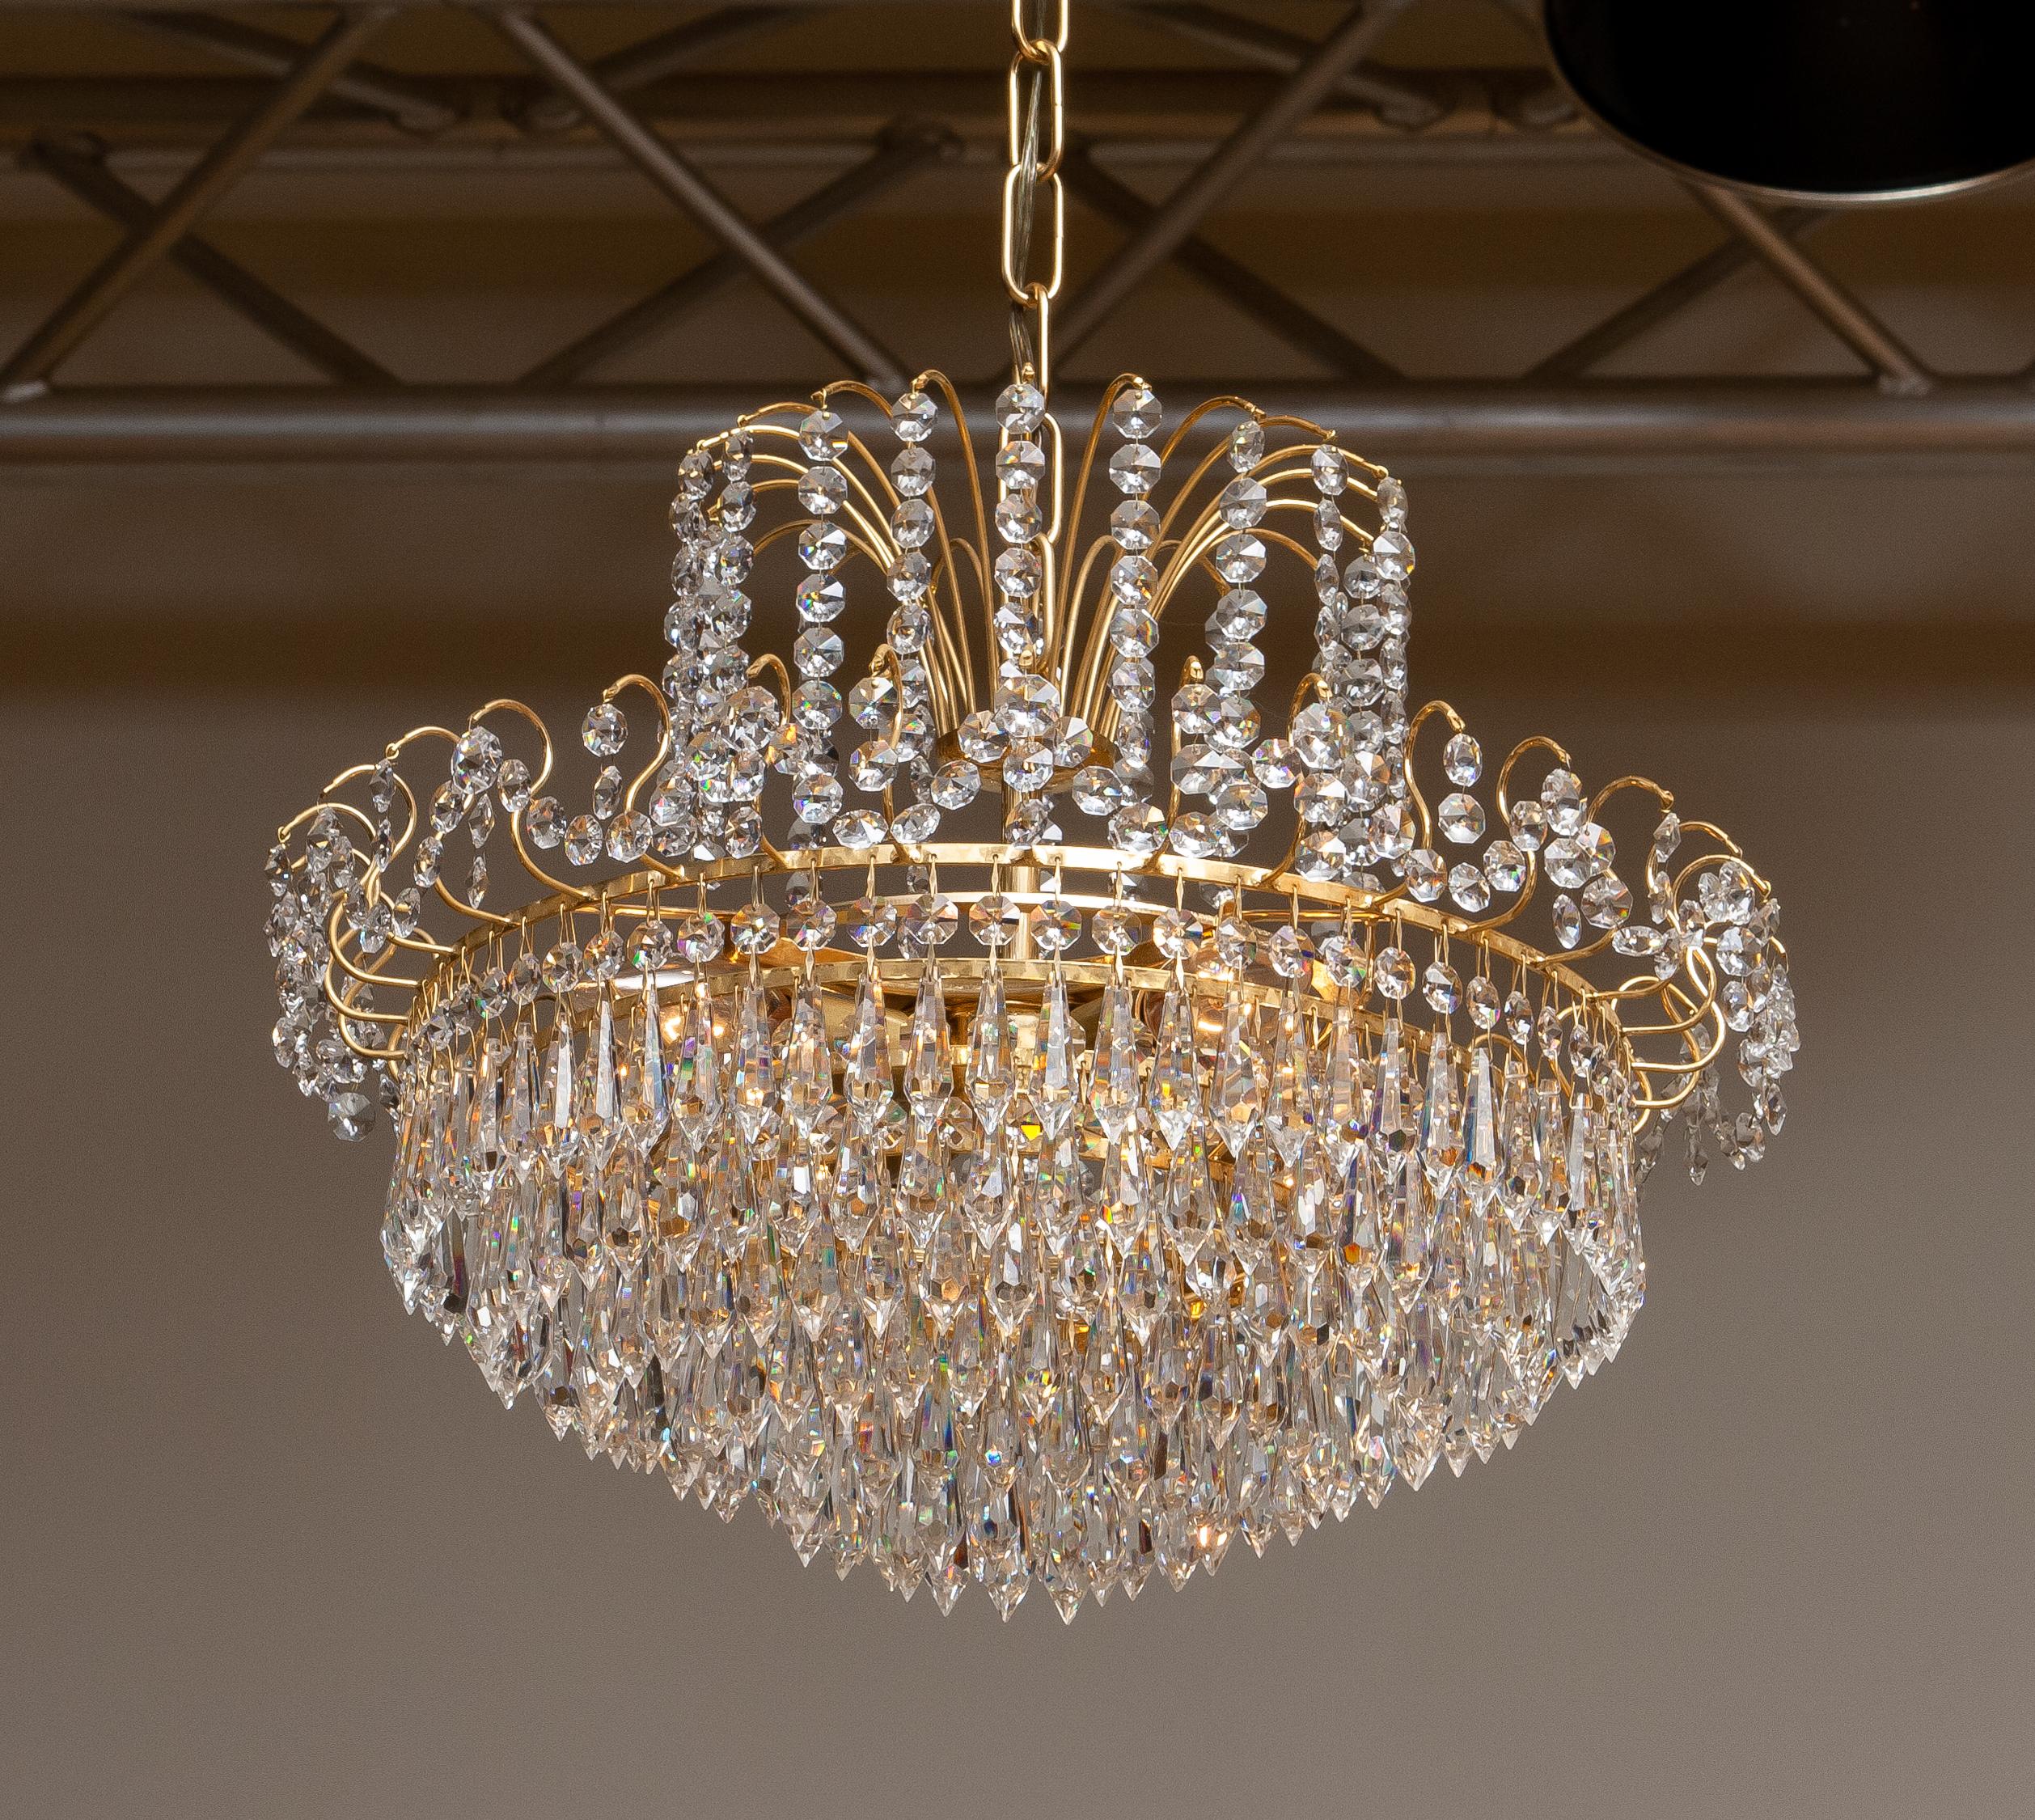 Neoclassical Revival 1970s, Gold-Plated and Faceted Crystal Chandelier Attributed to Rejmyre, Sweden